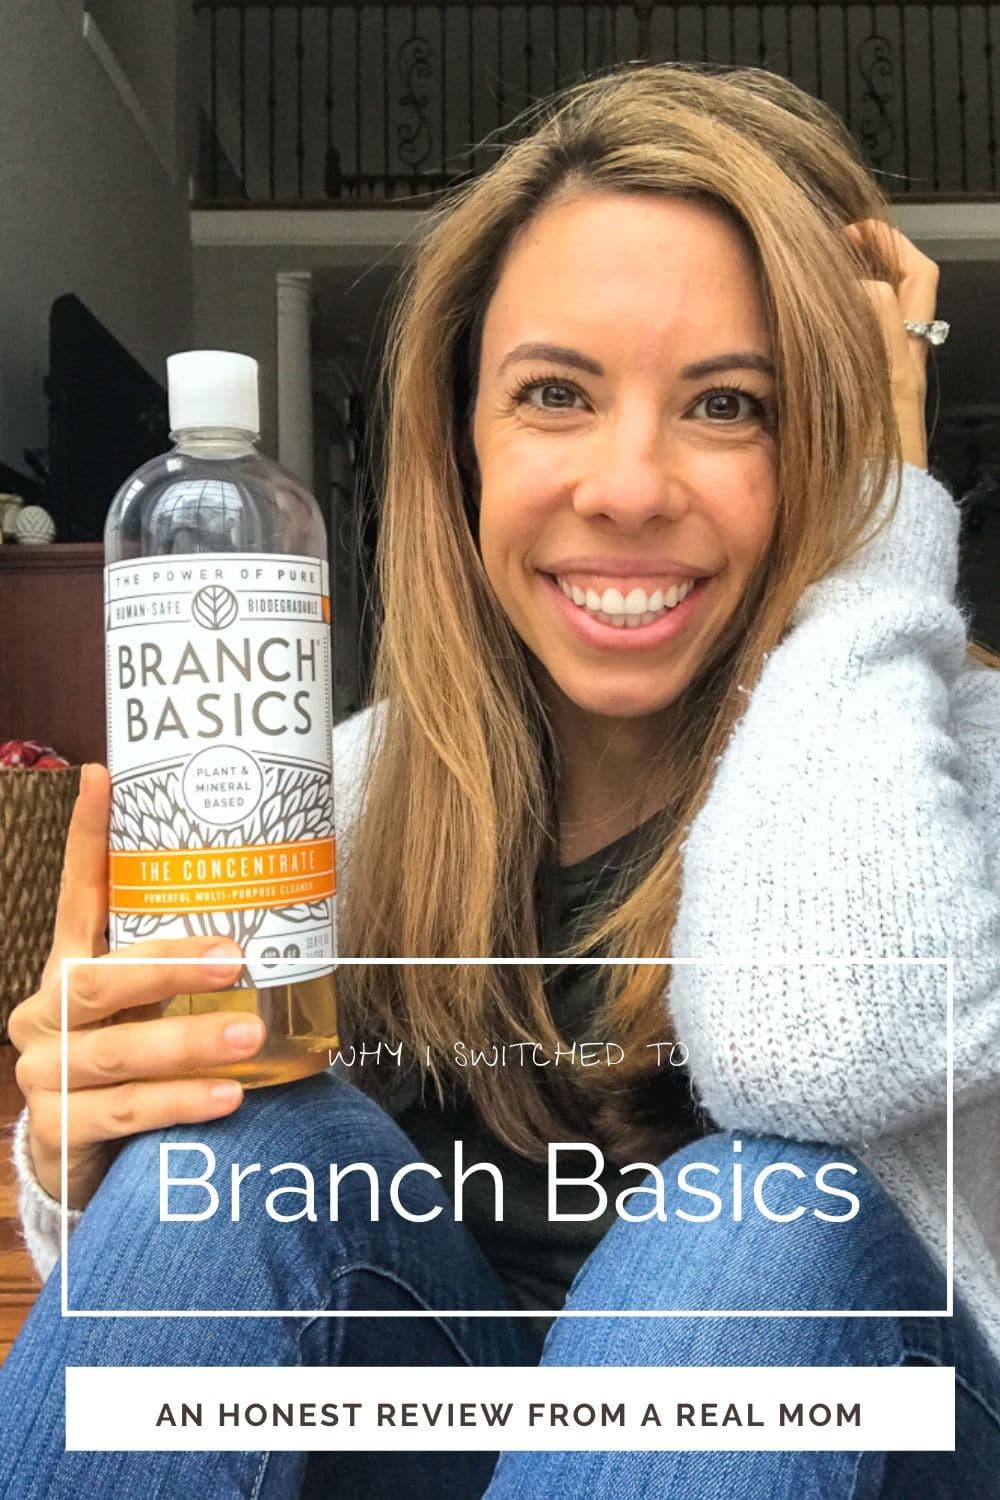 Branch Basics cleaner review